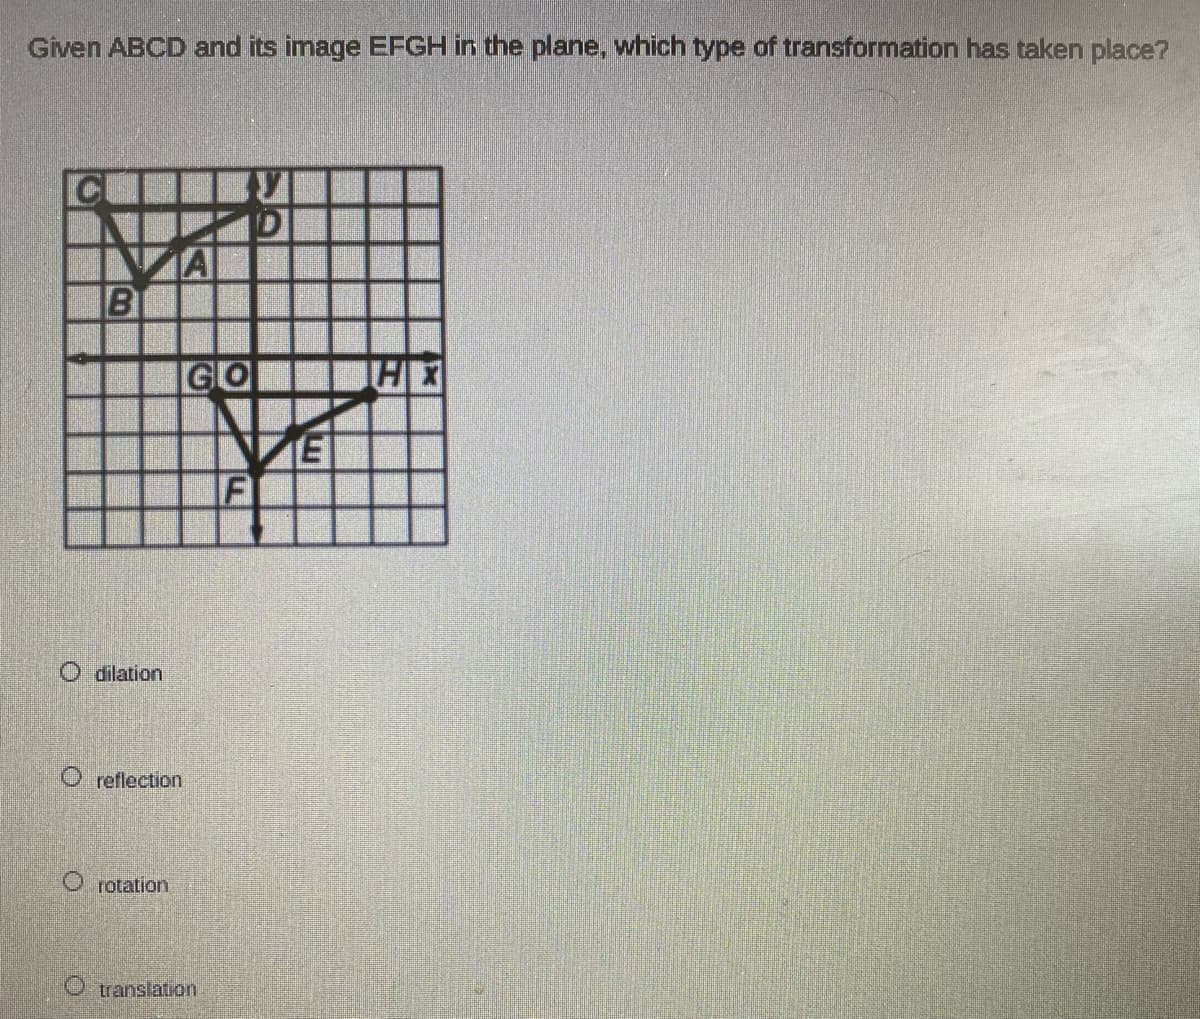 Given ABCD and its image EFGH in the plane, which type of transformation has taken place?
IB
GO
ET
O dilation
O reflection
rotation
O translation
